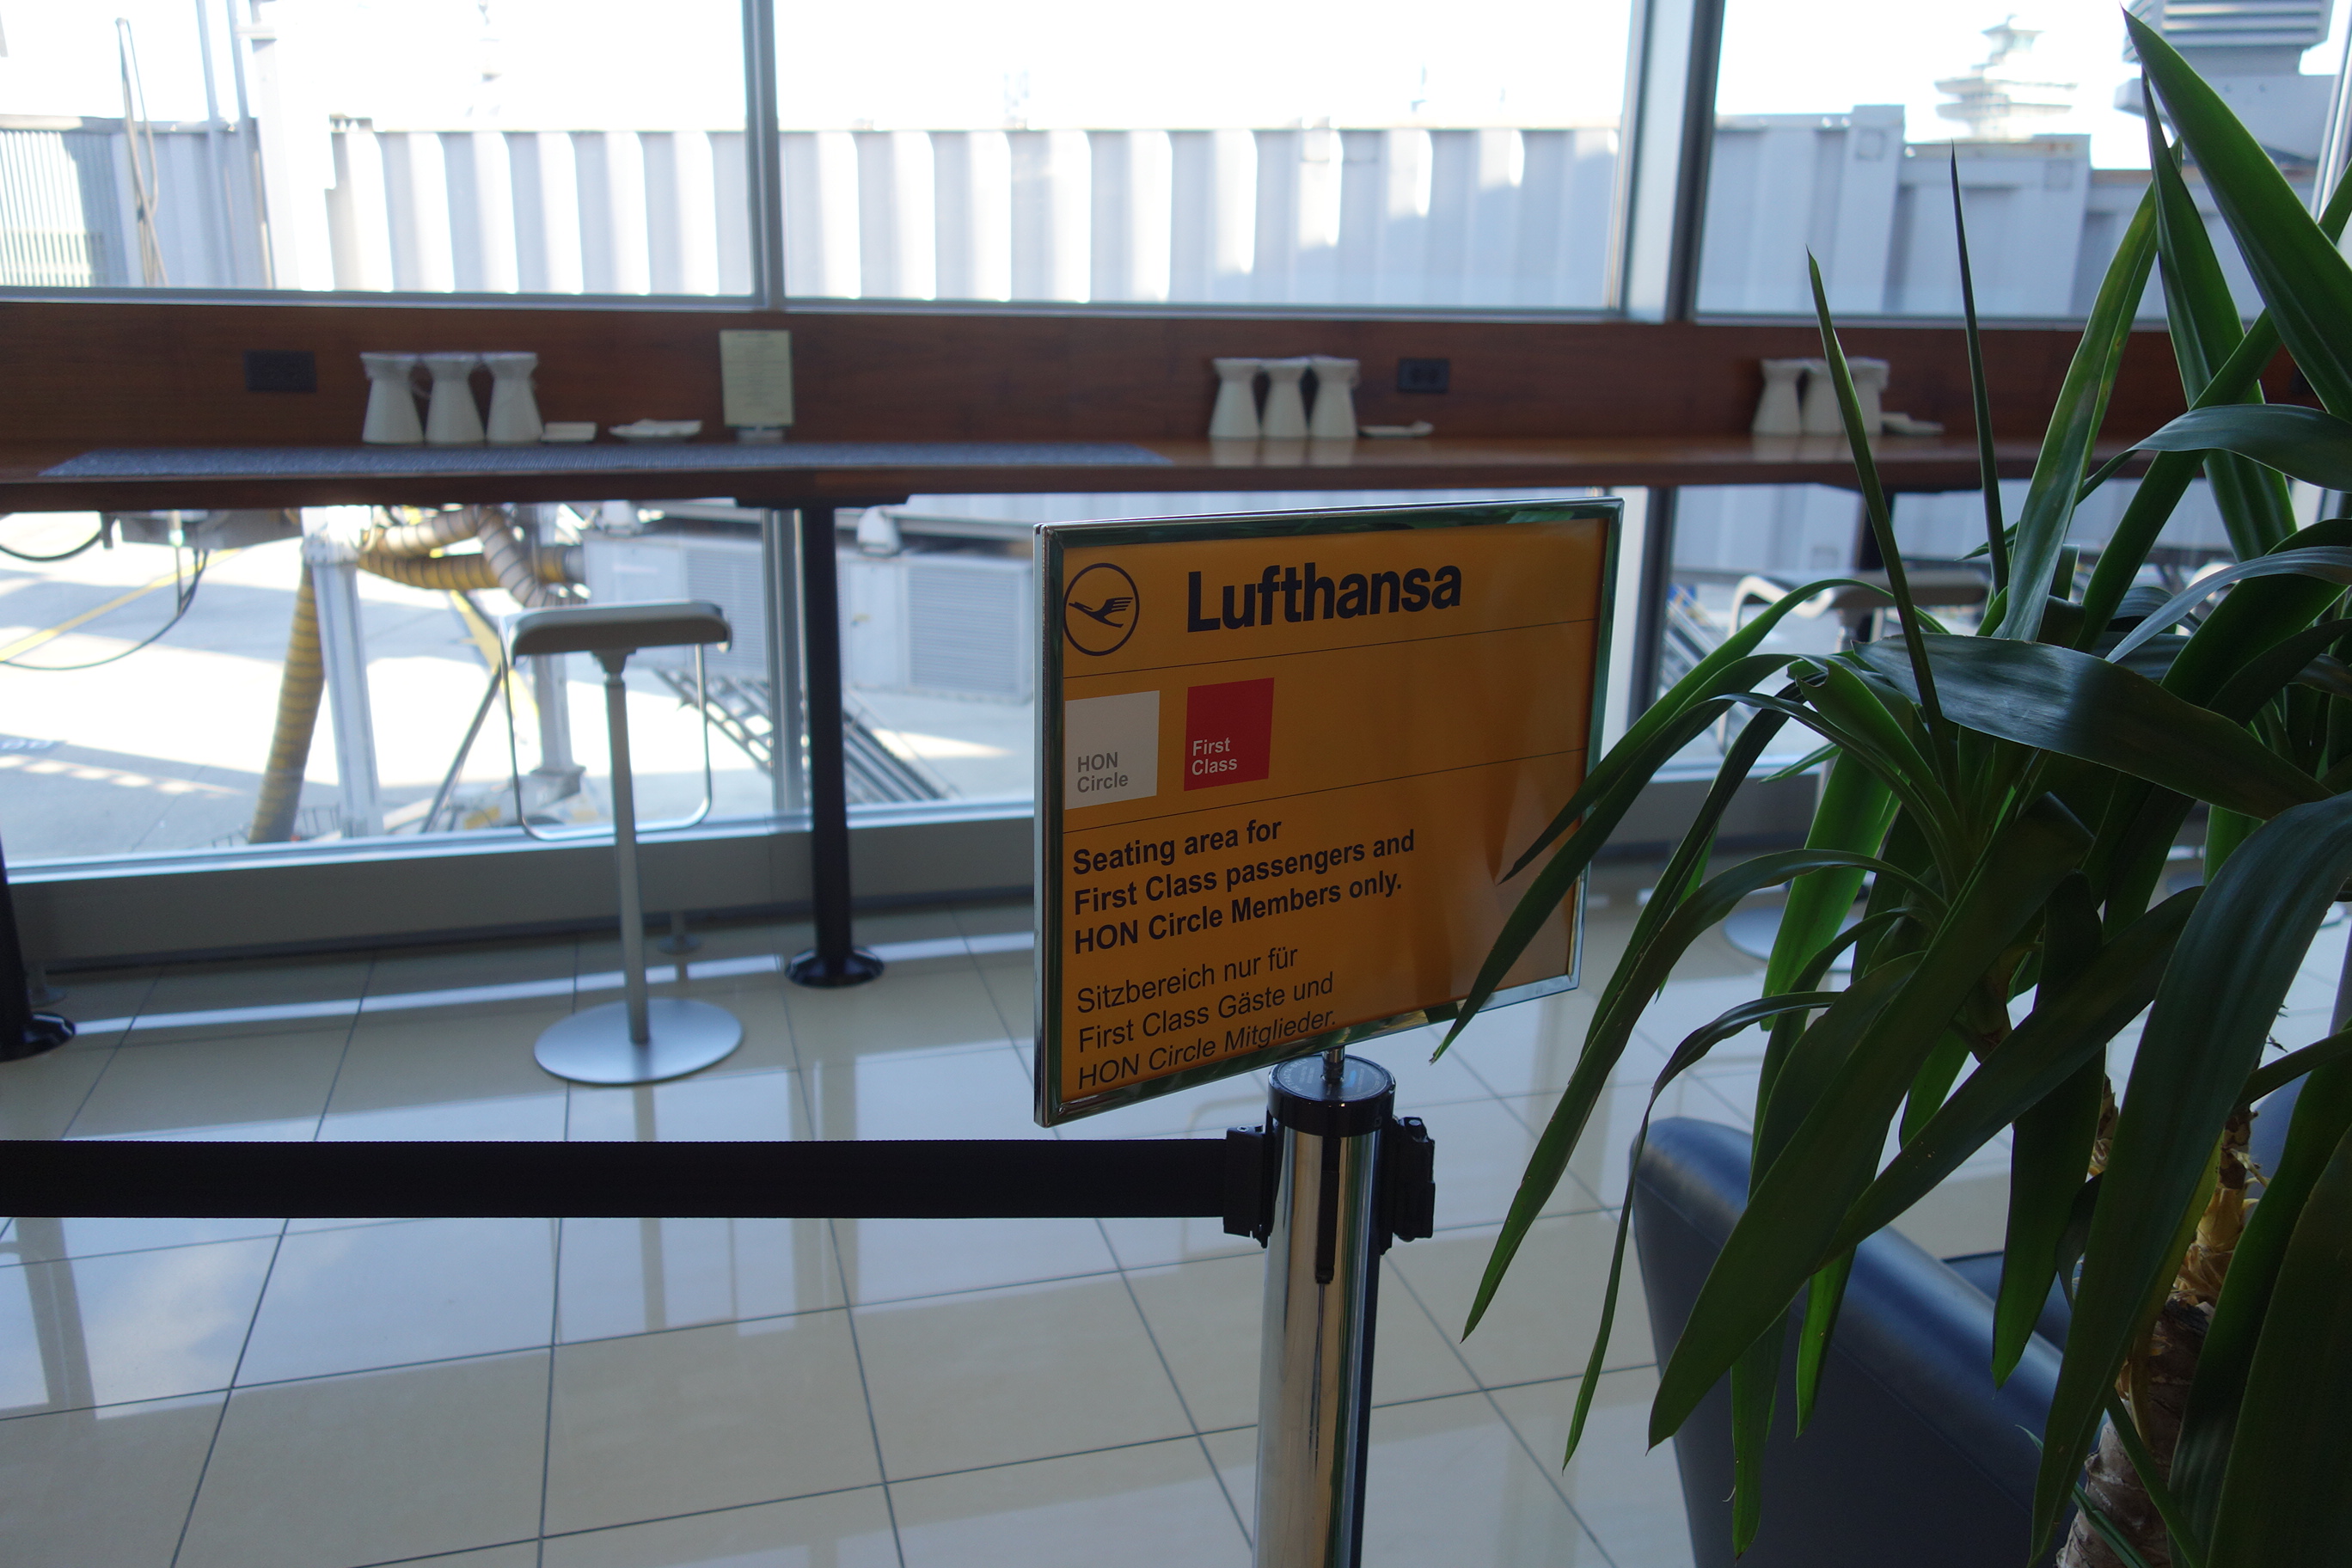 Small roped off seating area for Lufthansa first class passengers